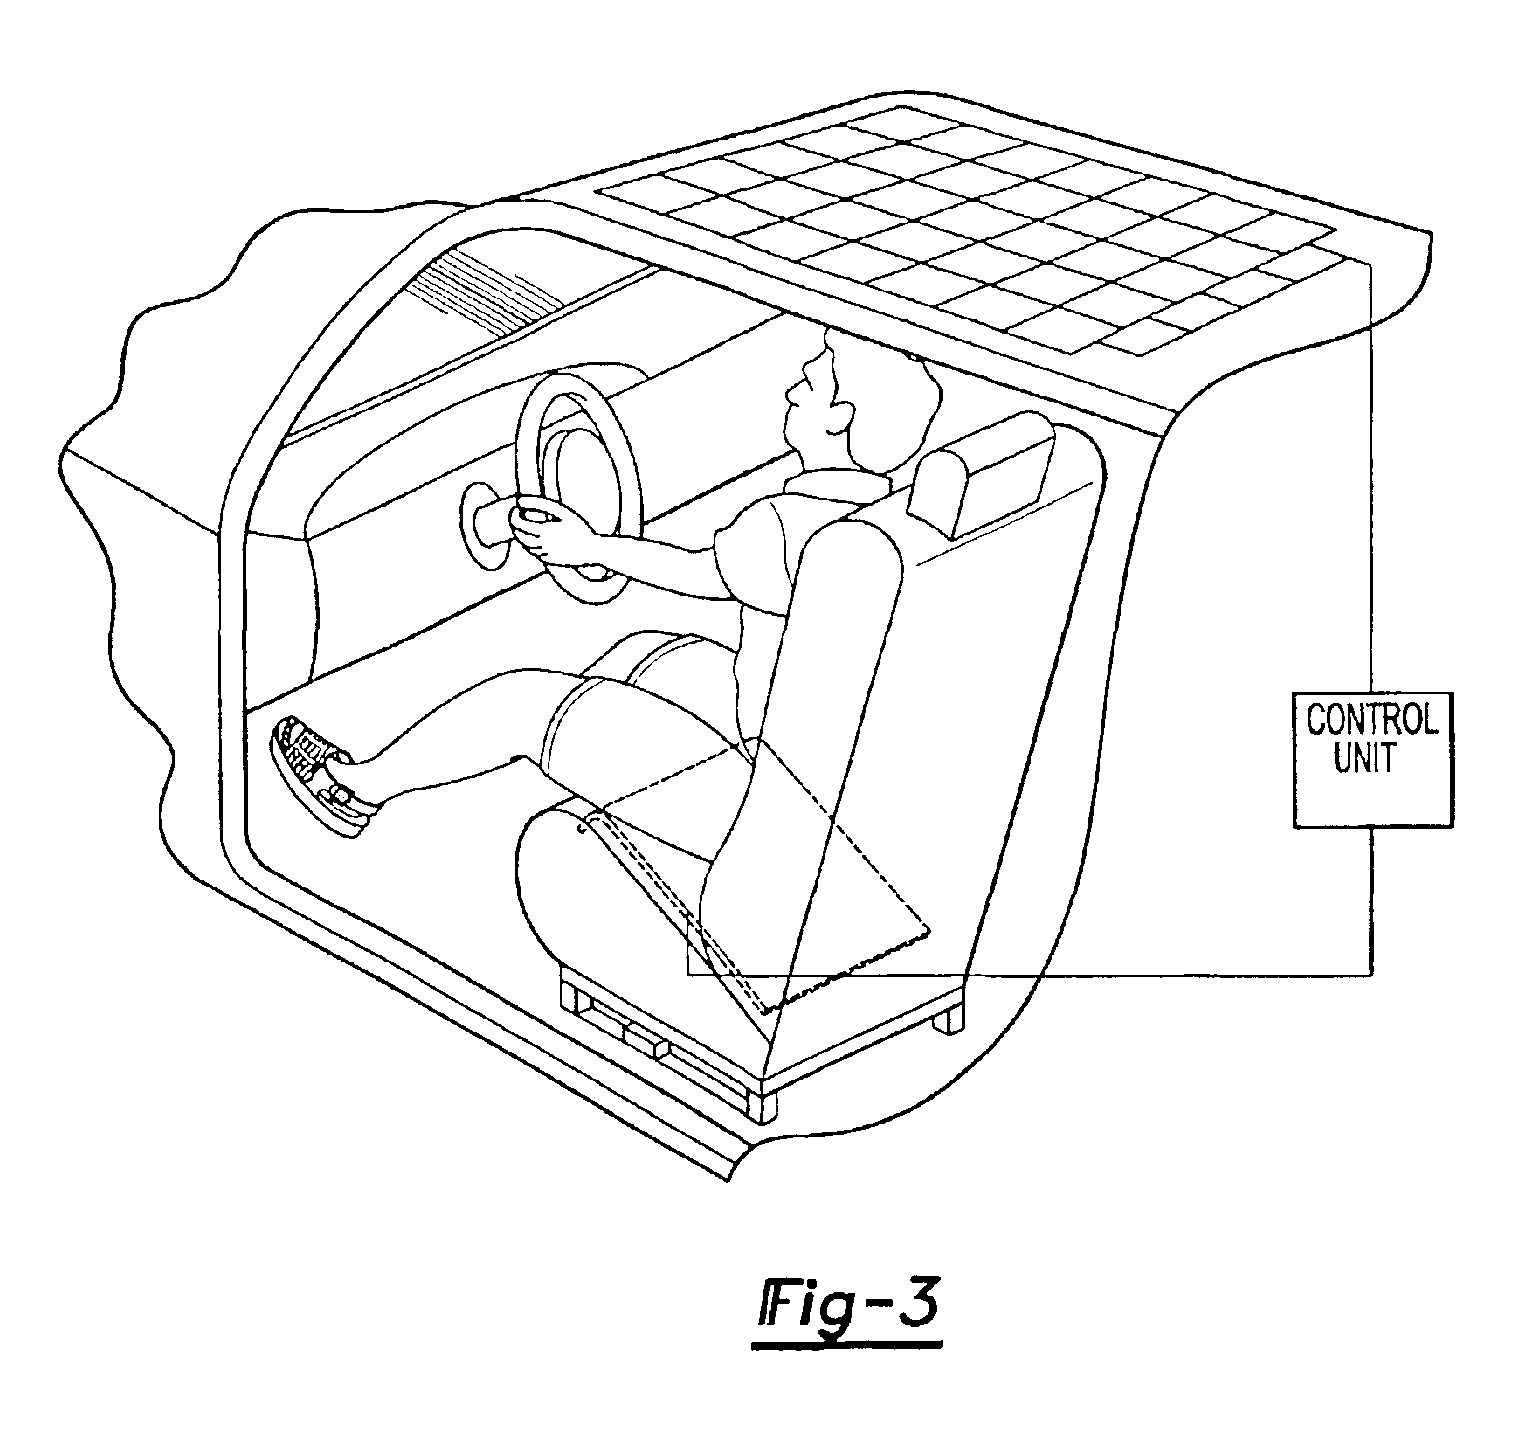 Vehicle occupant weight estimation apparatus